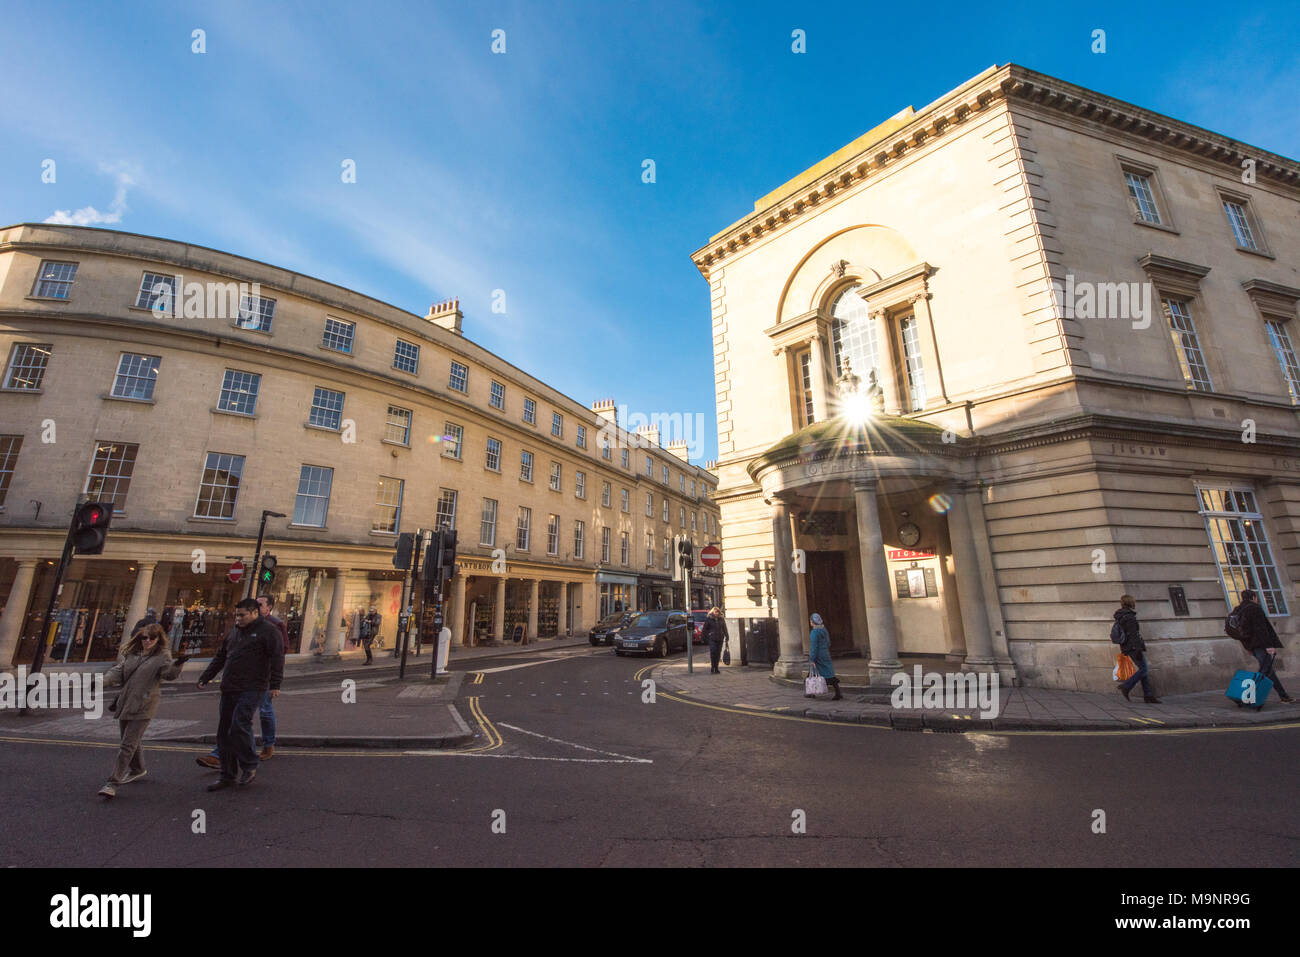 Sunny street scene in Bath at the junction of New Bond Street and Walcot Street with shoppers and cars waiting at traffic lights Stock Photo